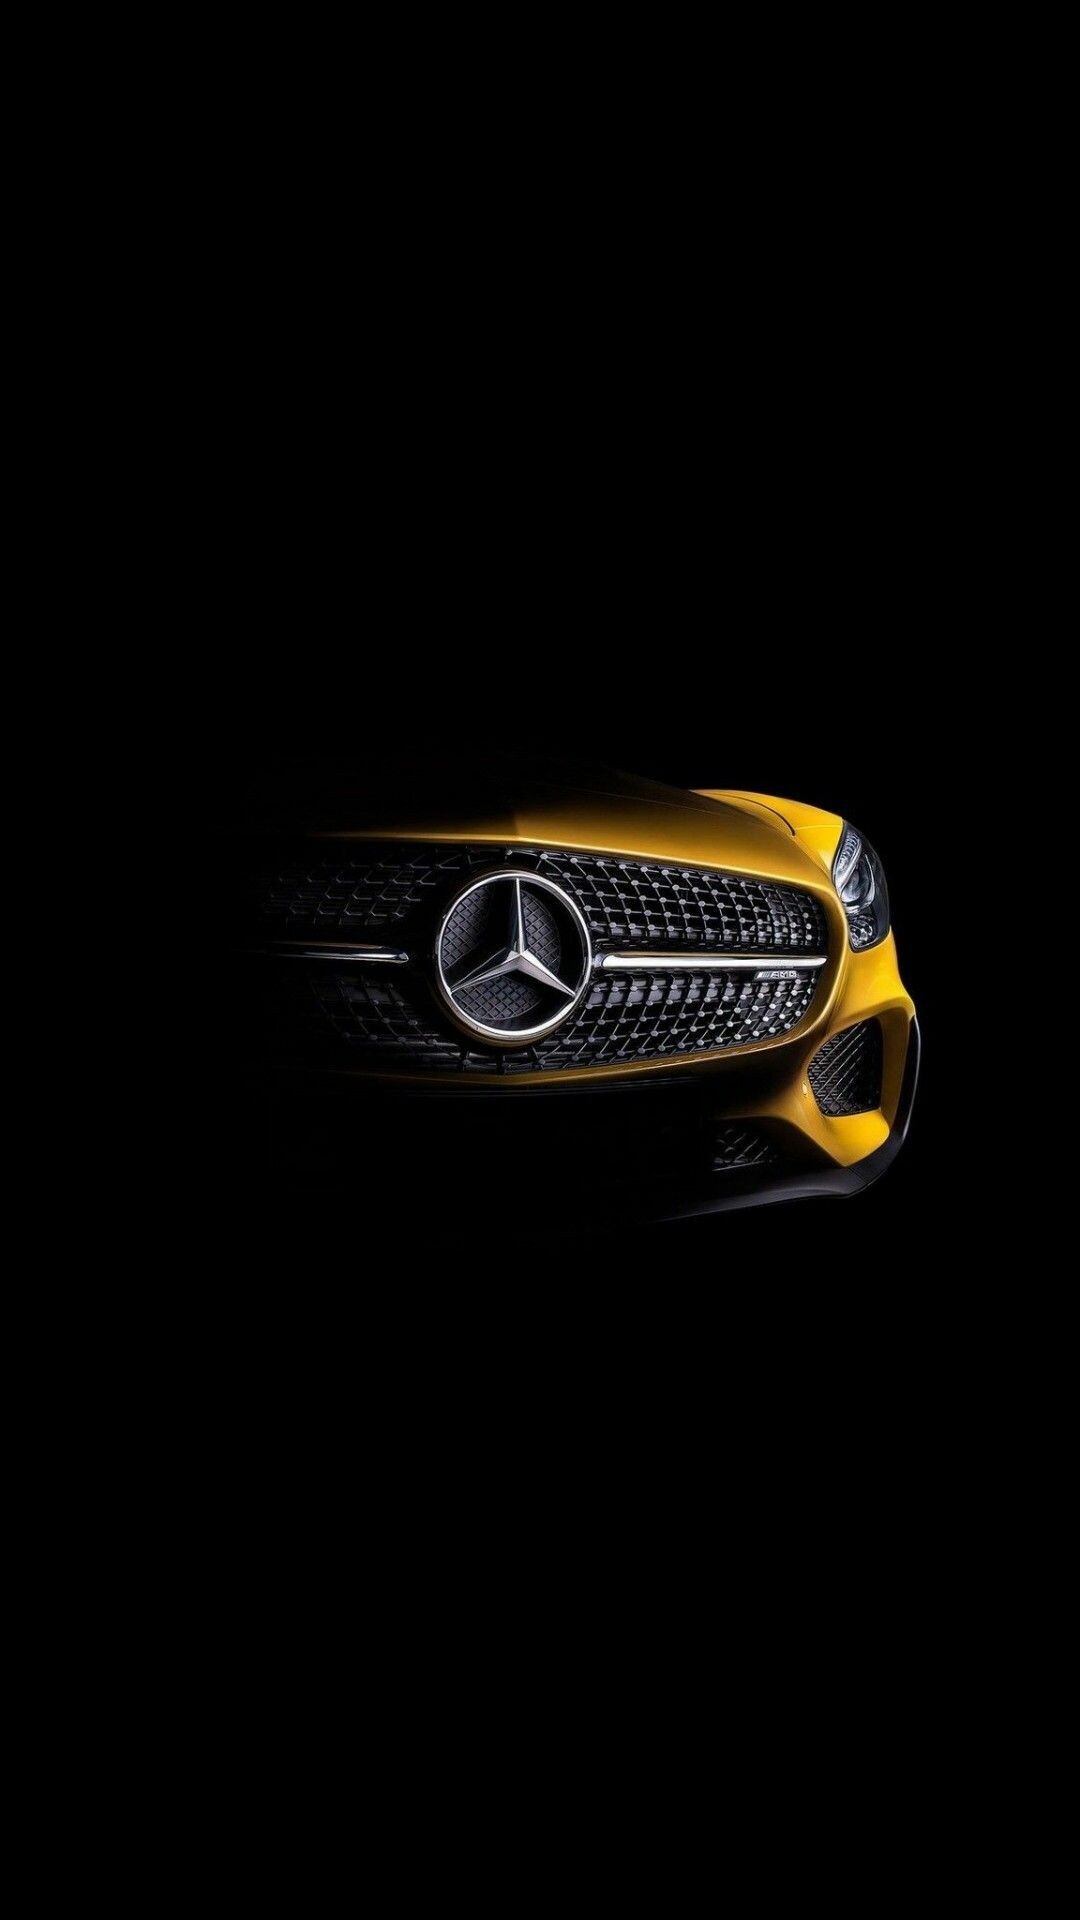 Mercedes-Benz: Became the first automobile company to offer anti lock braking system in its S class vehicles in 1978. 1080x1920 Full HD Background.